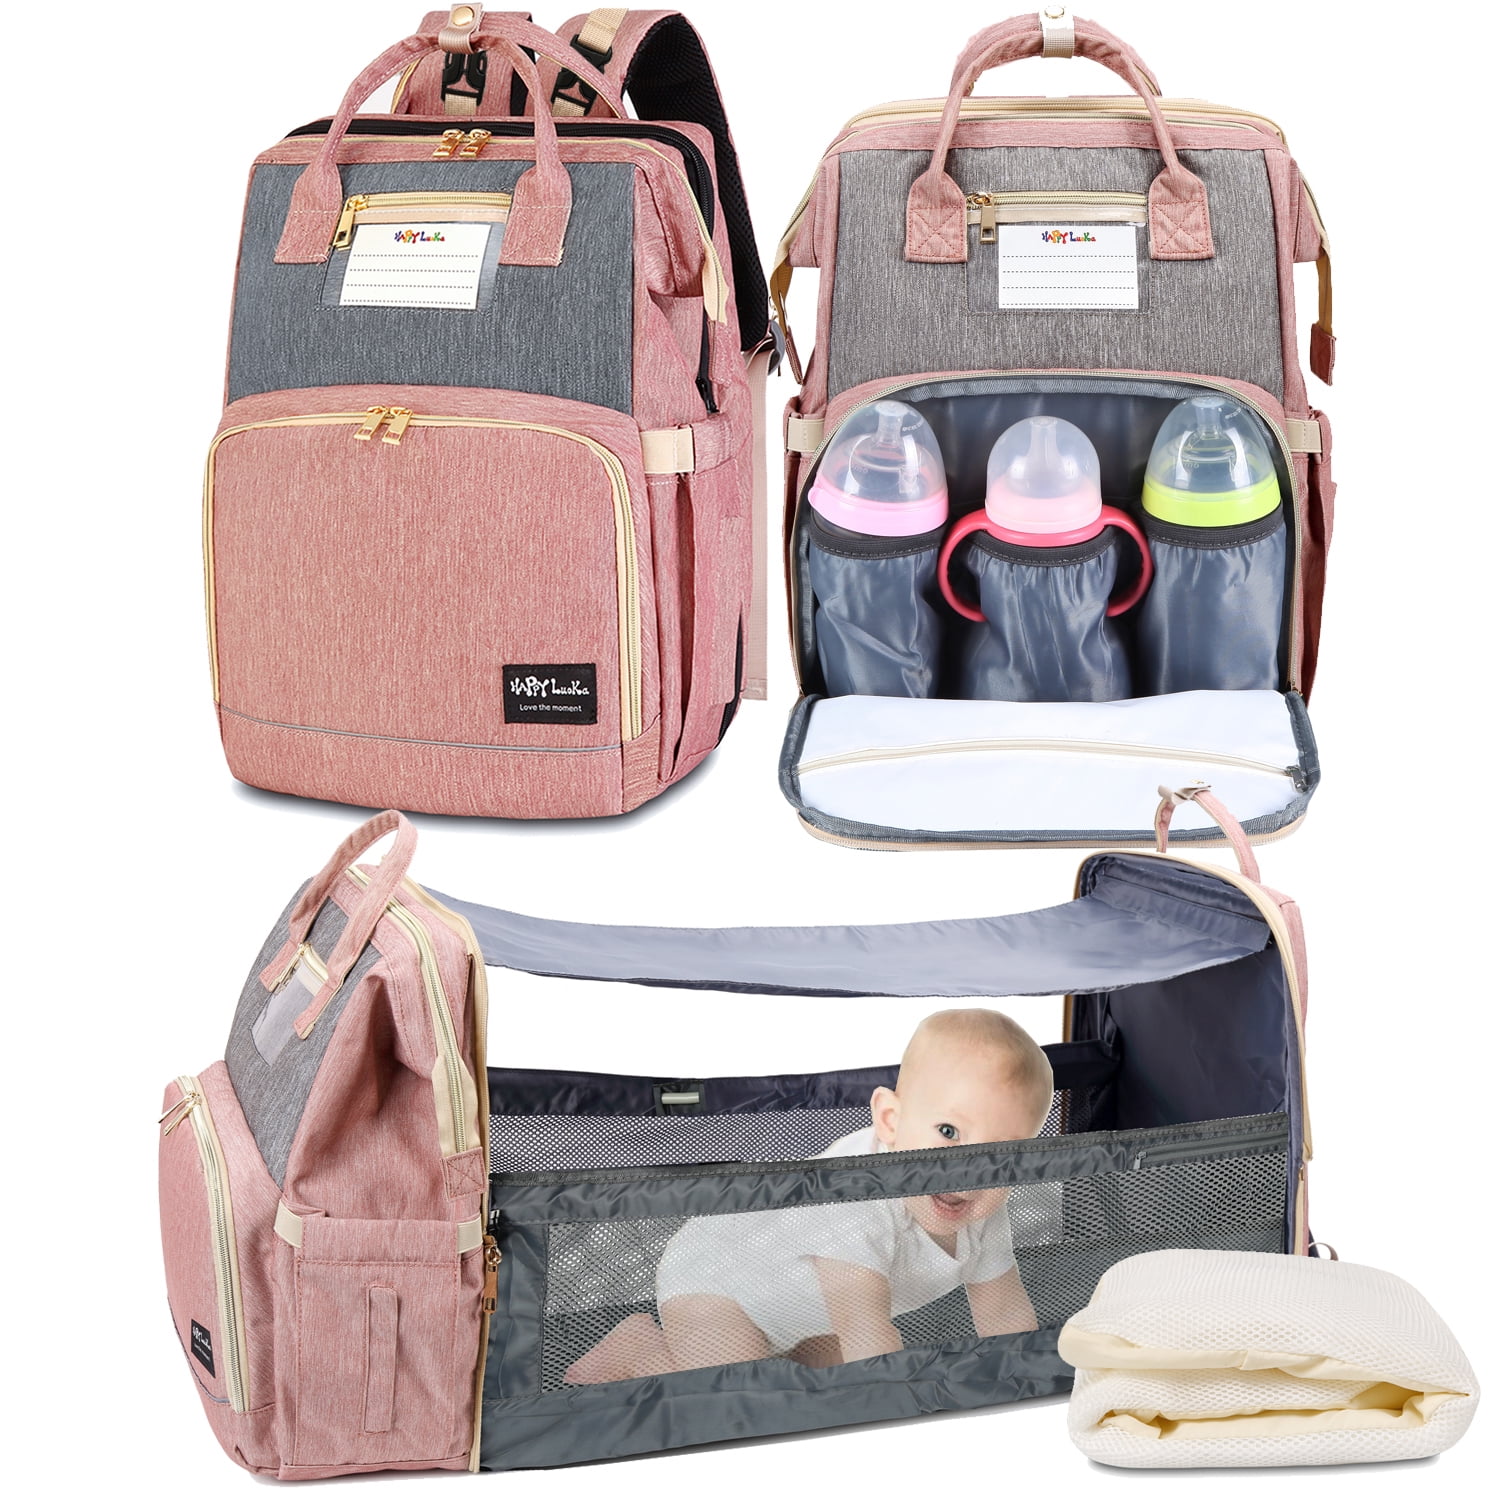 Diaper Bags for Baby Girls